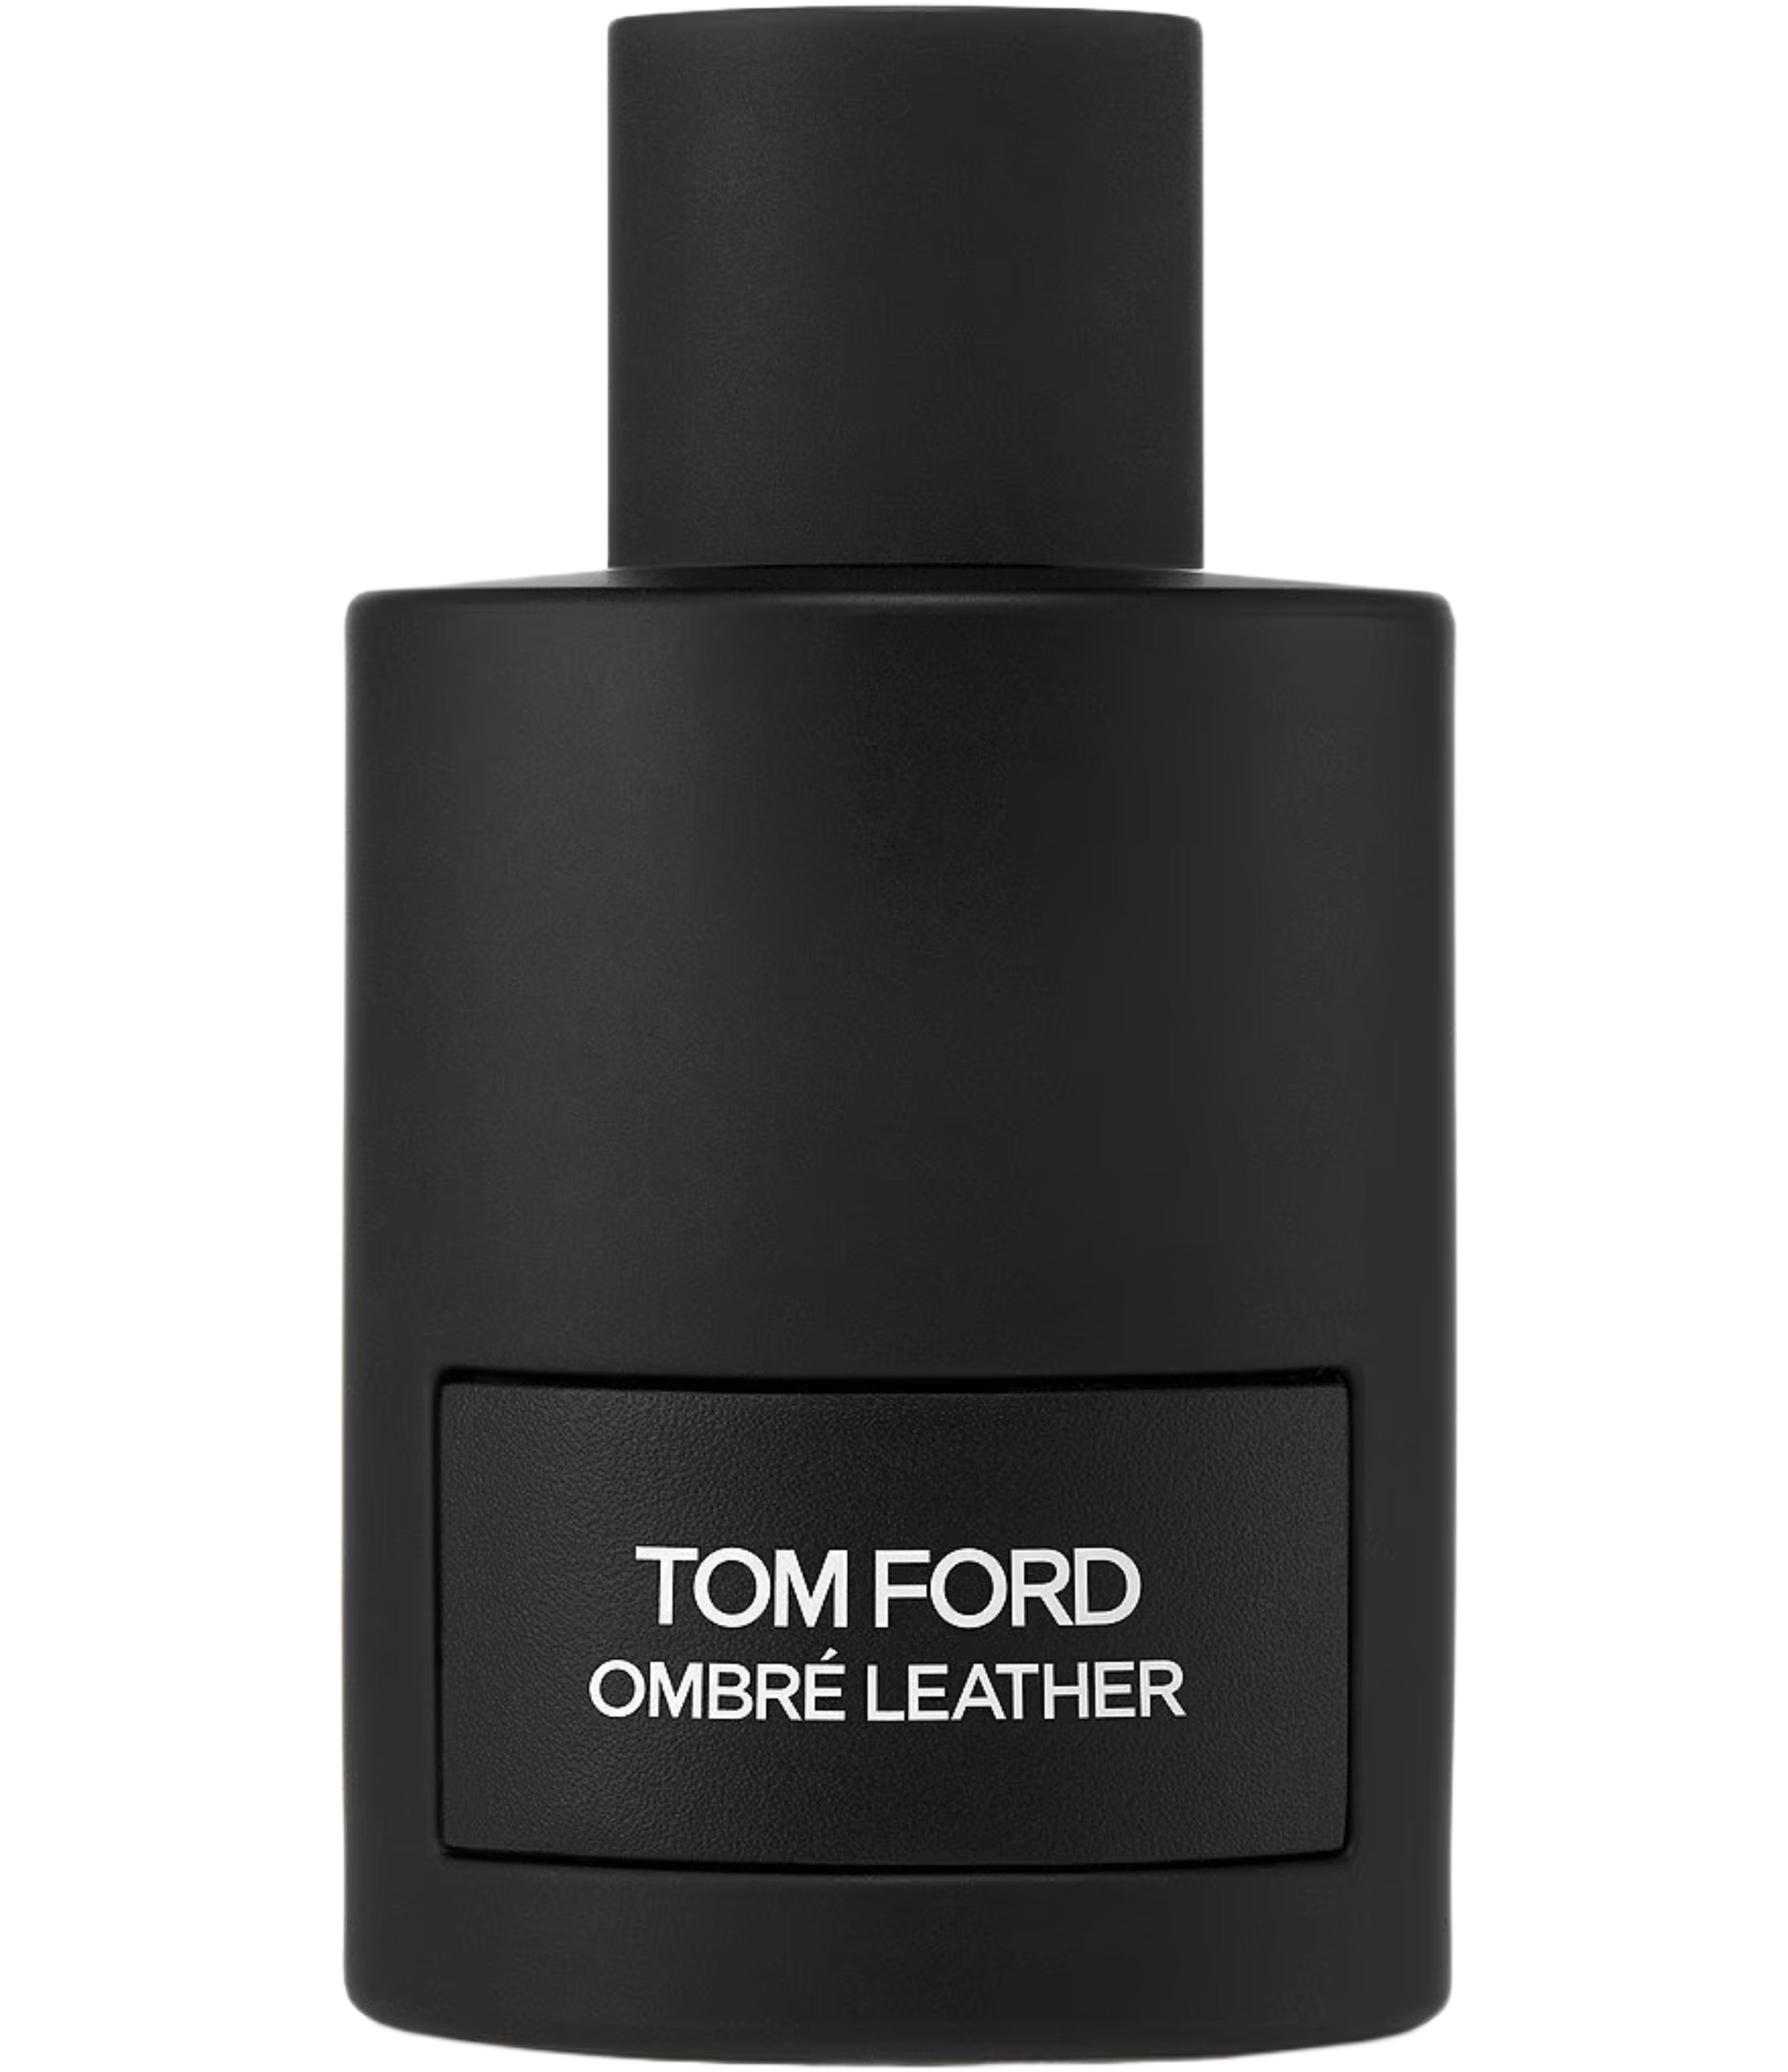 Johnny Picard inspired by Ombré Leather TOM FORD